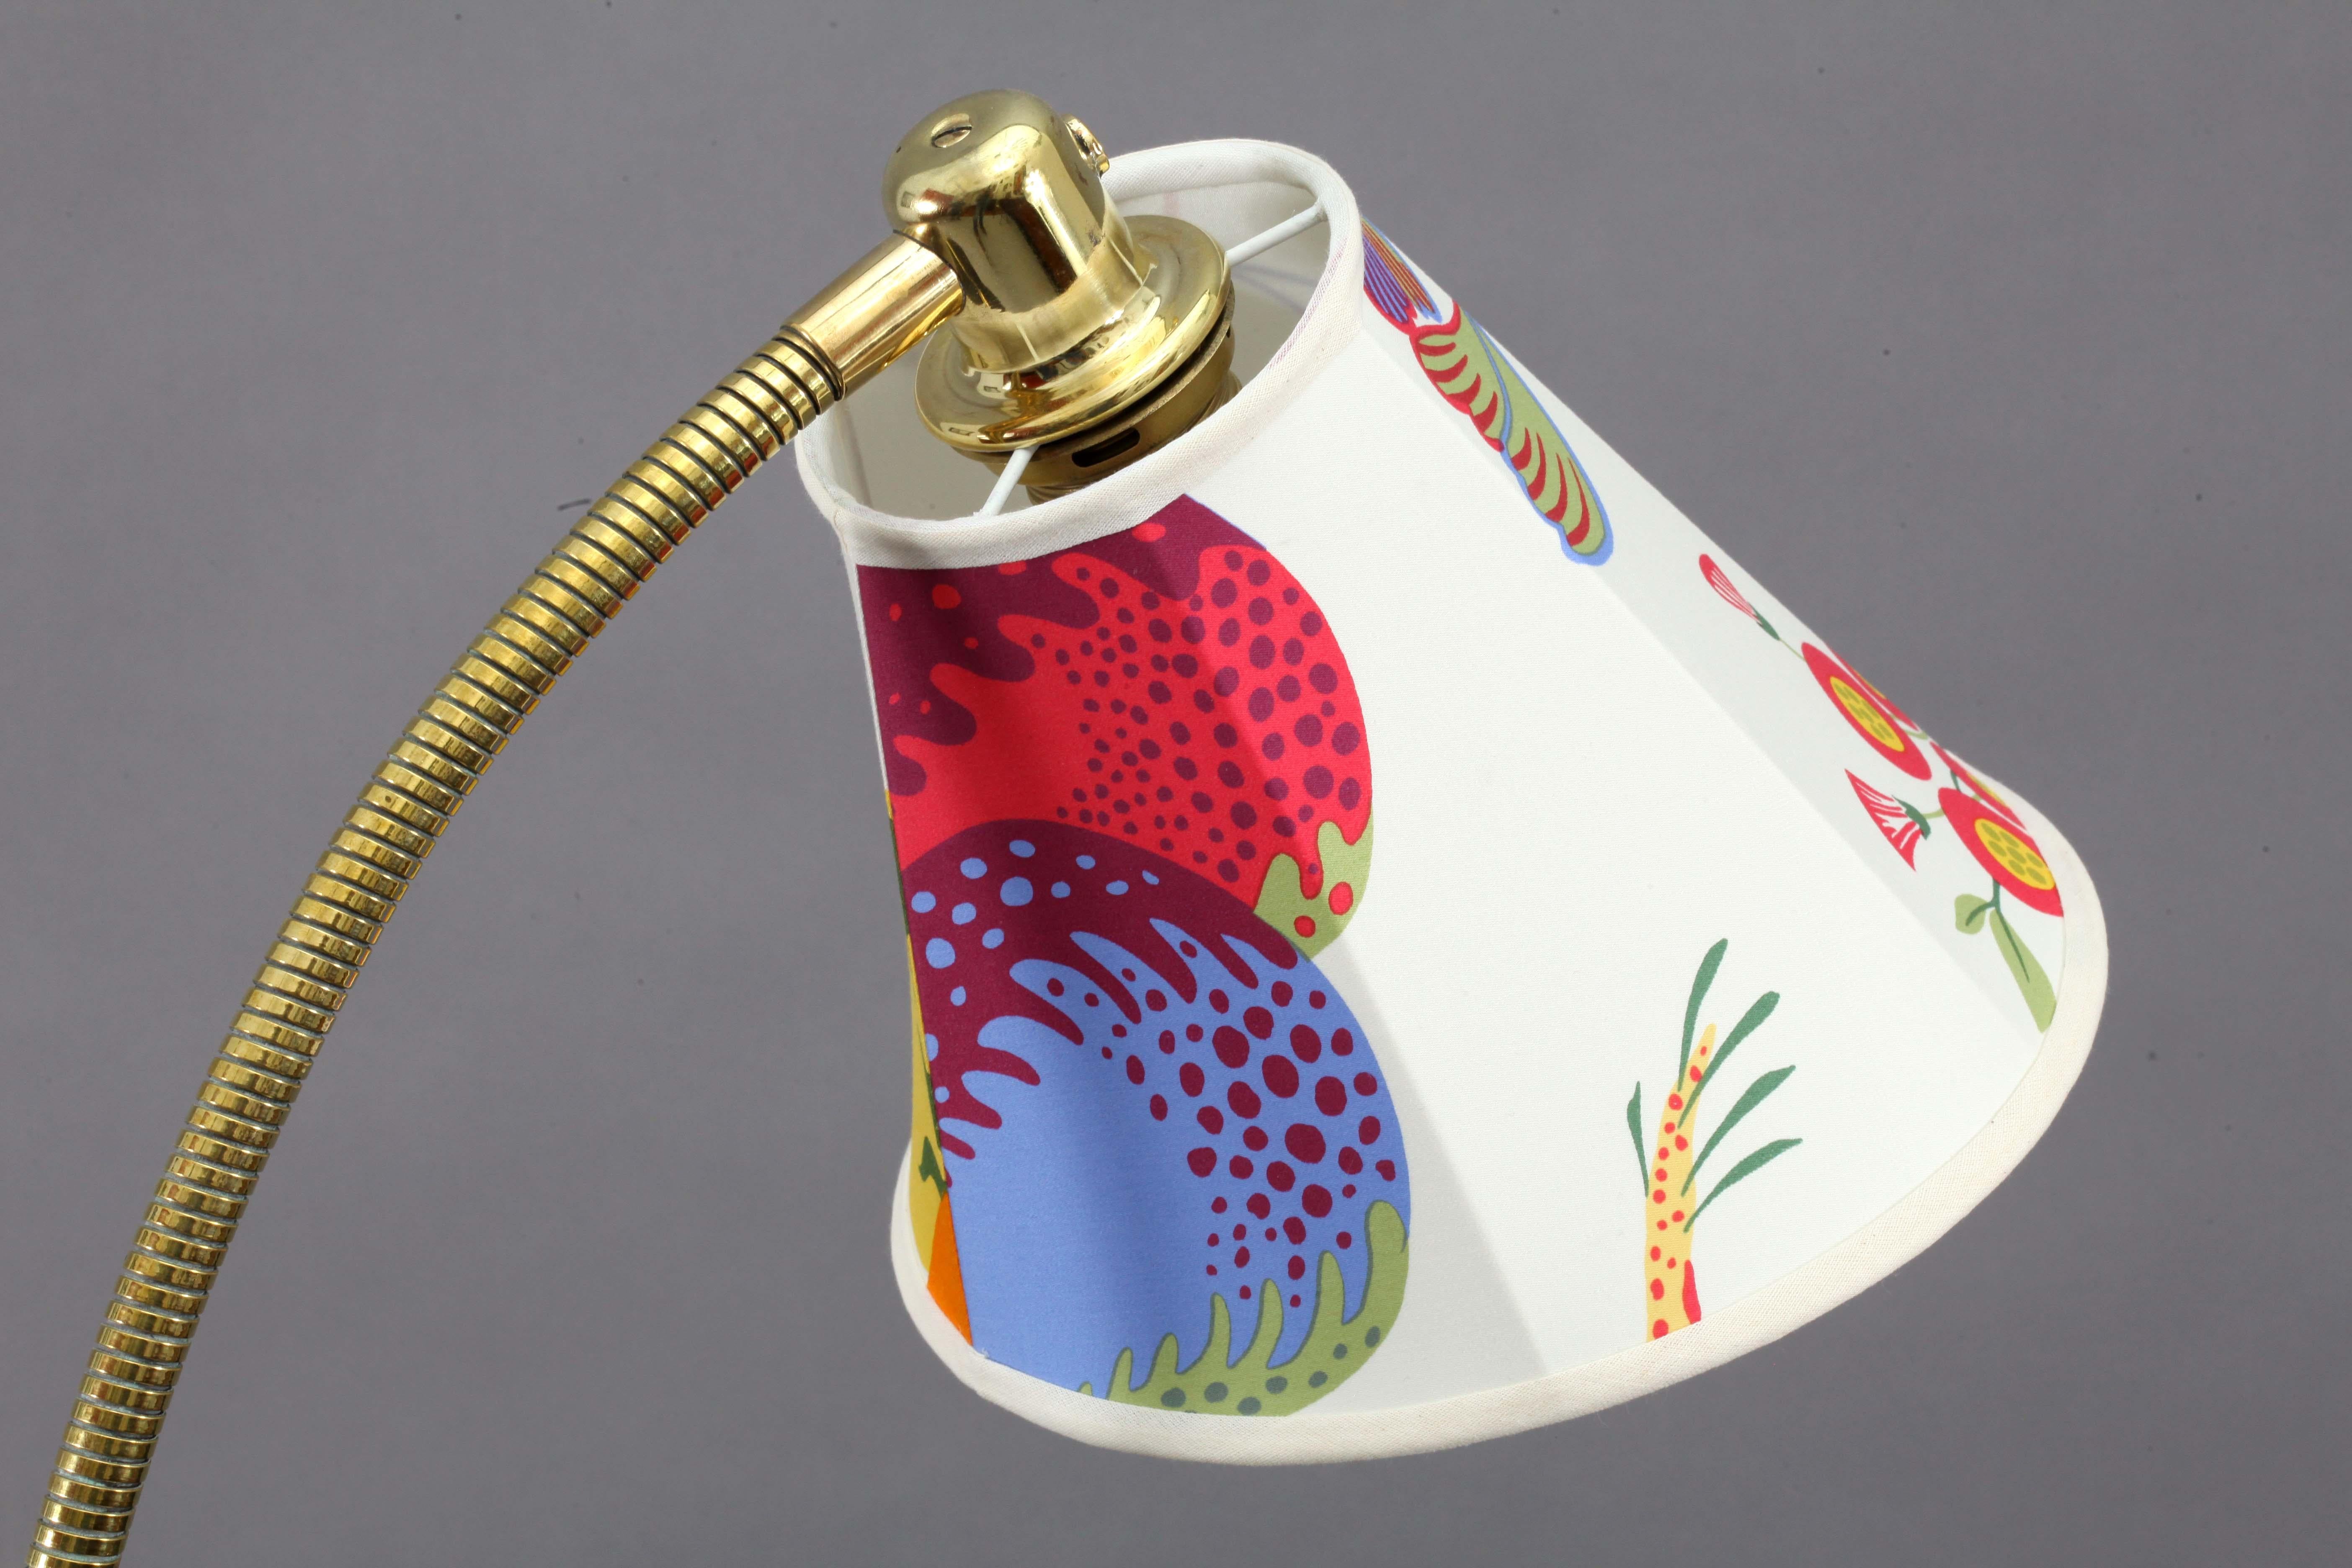 Table lamp
J.T. Kalmar
Modell tisch überall
Vienna, 1950
Brass base, leather grip, flexible arm, shade with Josef Frank fabric.